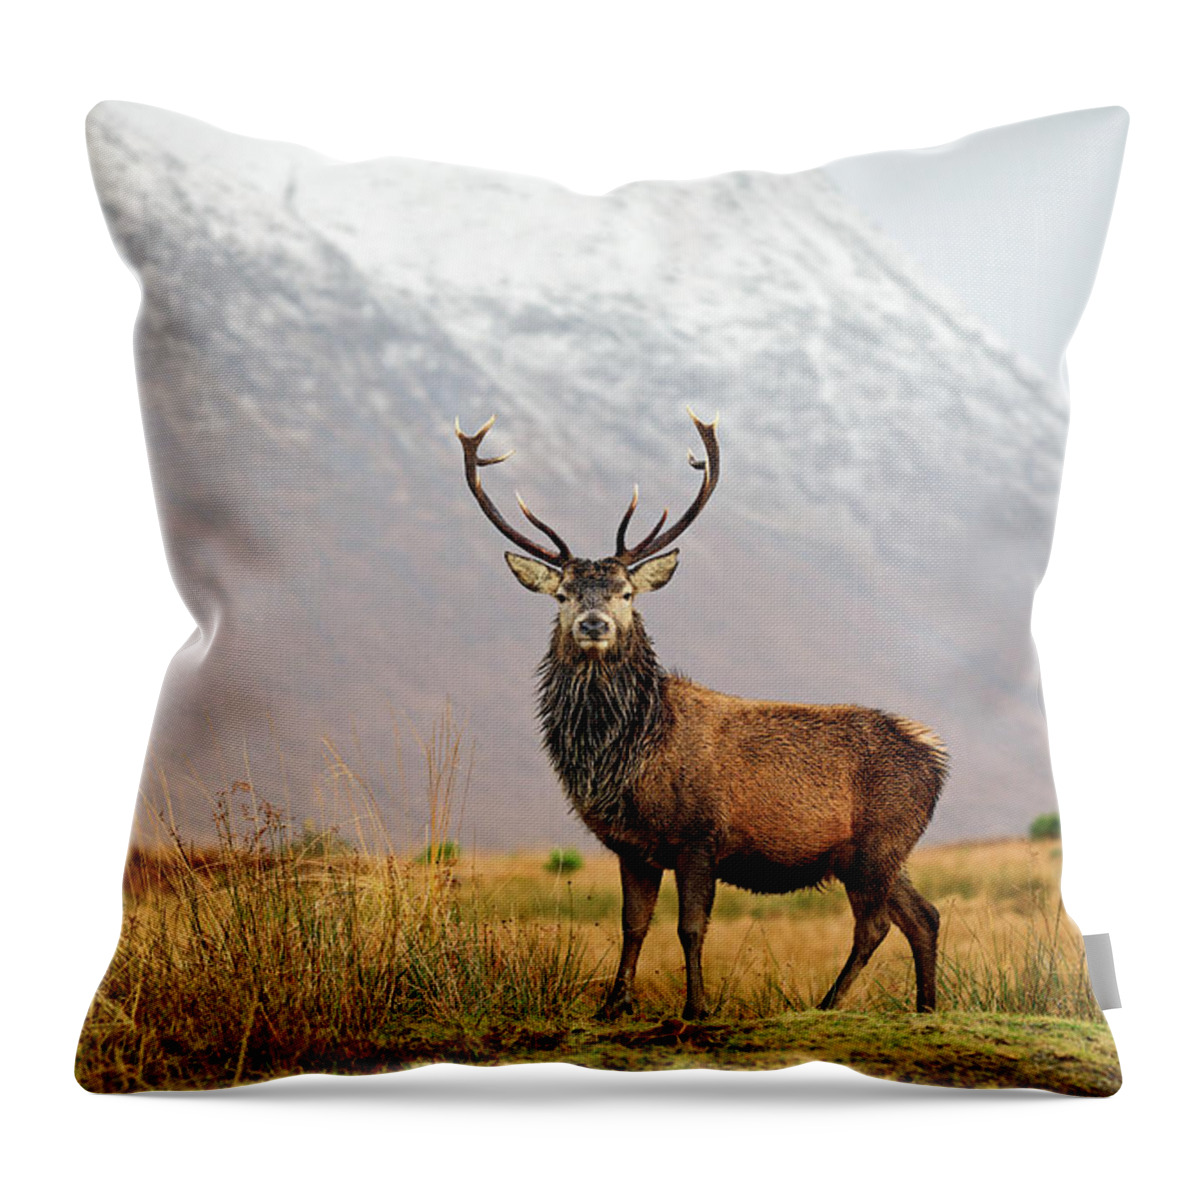 Stag Throw Pillow featuring the photograph Scottish Red Deer Stag - Glencoe-2 by Grant Glendinning